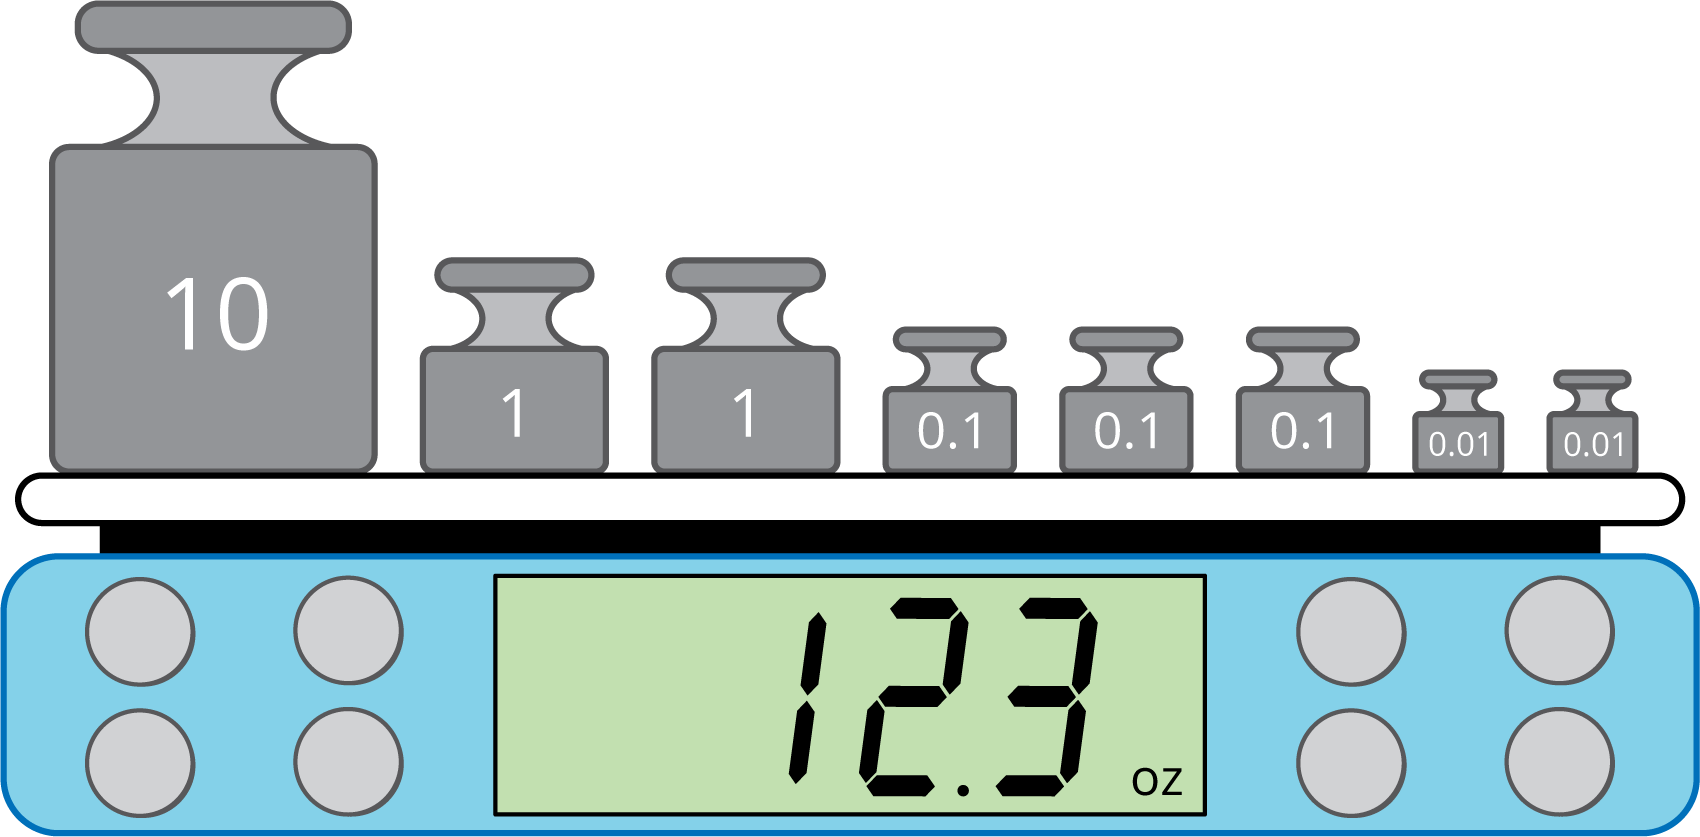 12 and 3 tenths ounces on scale screen. Weights include. 10 ounce weight, 1. 1 ounce weights, 2, 1 tenth ounce weights, 3, 1 hundredth ounce weights, 2.  